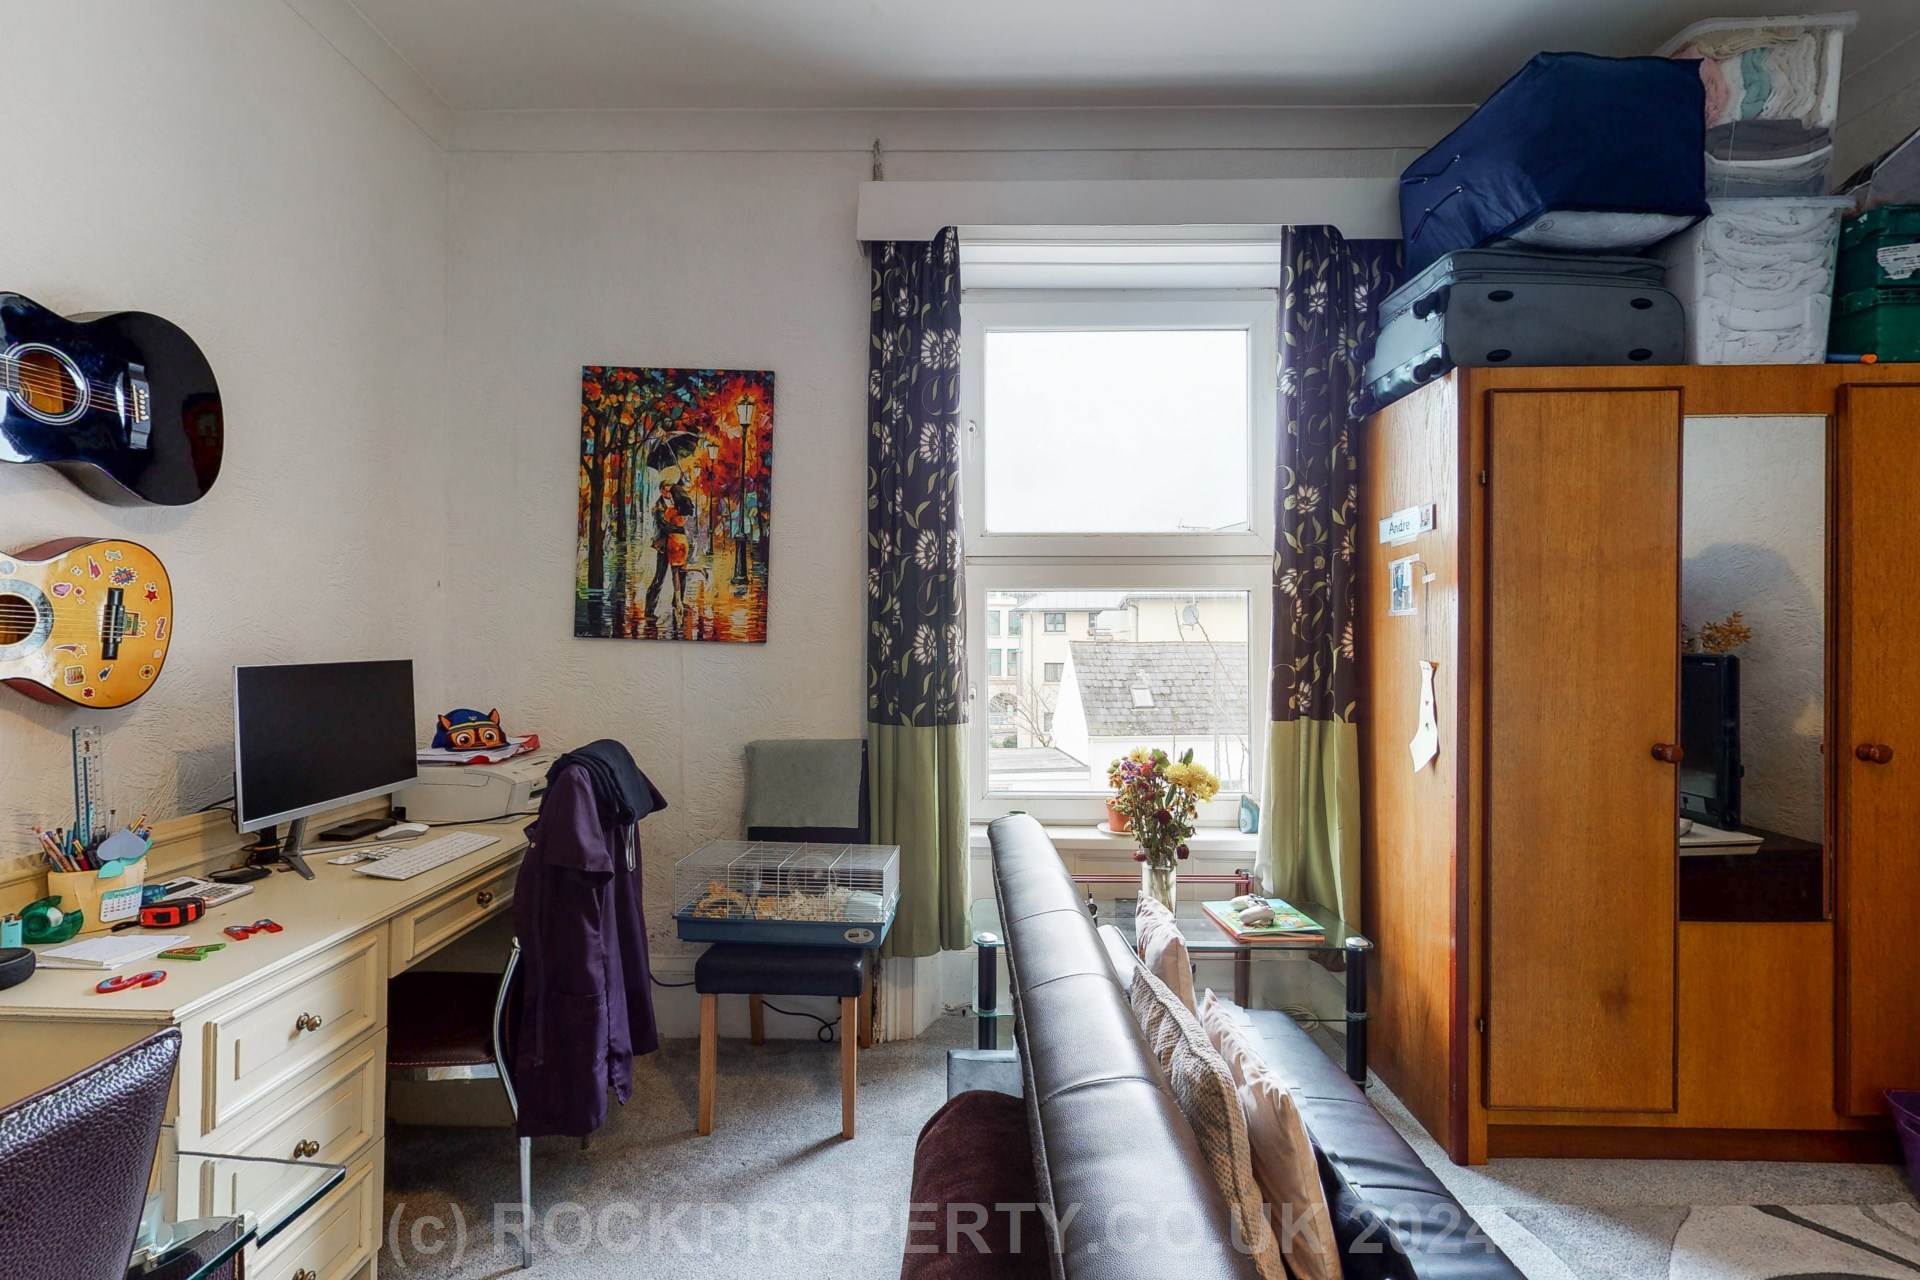 FIRST FLOOR 1 BED FLAT, St Saviours Road, St Helier, Image 7